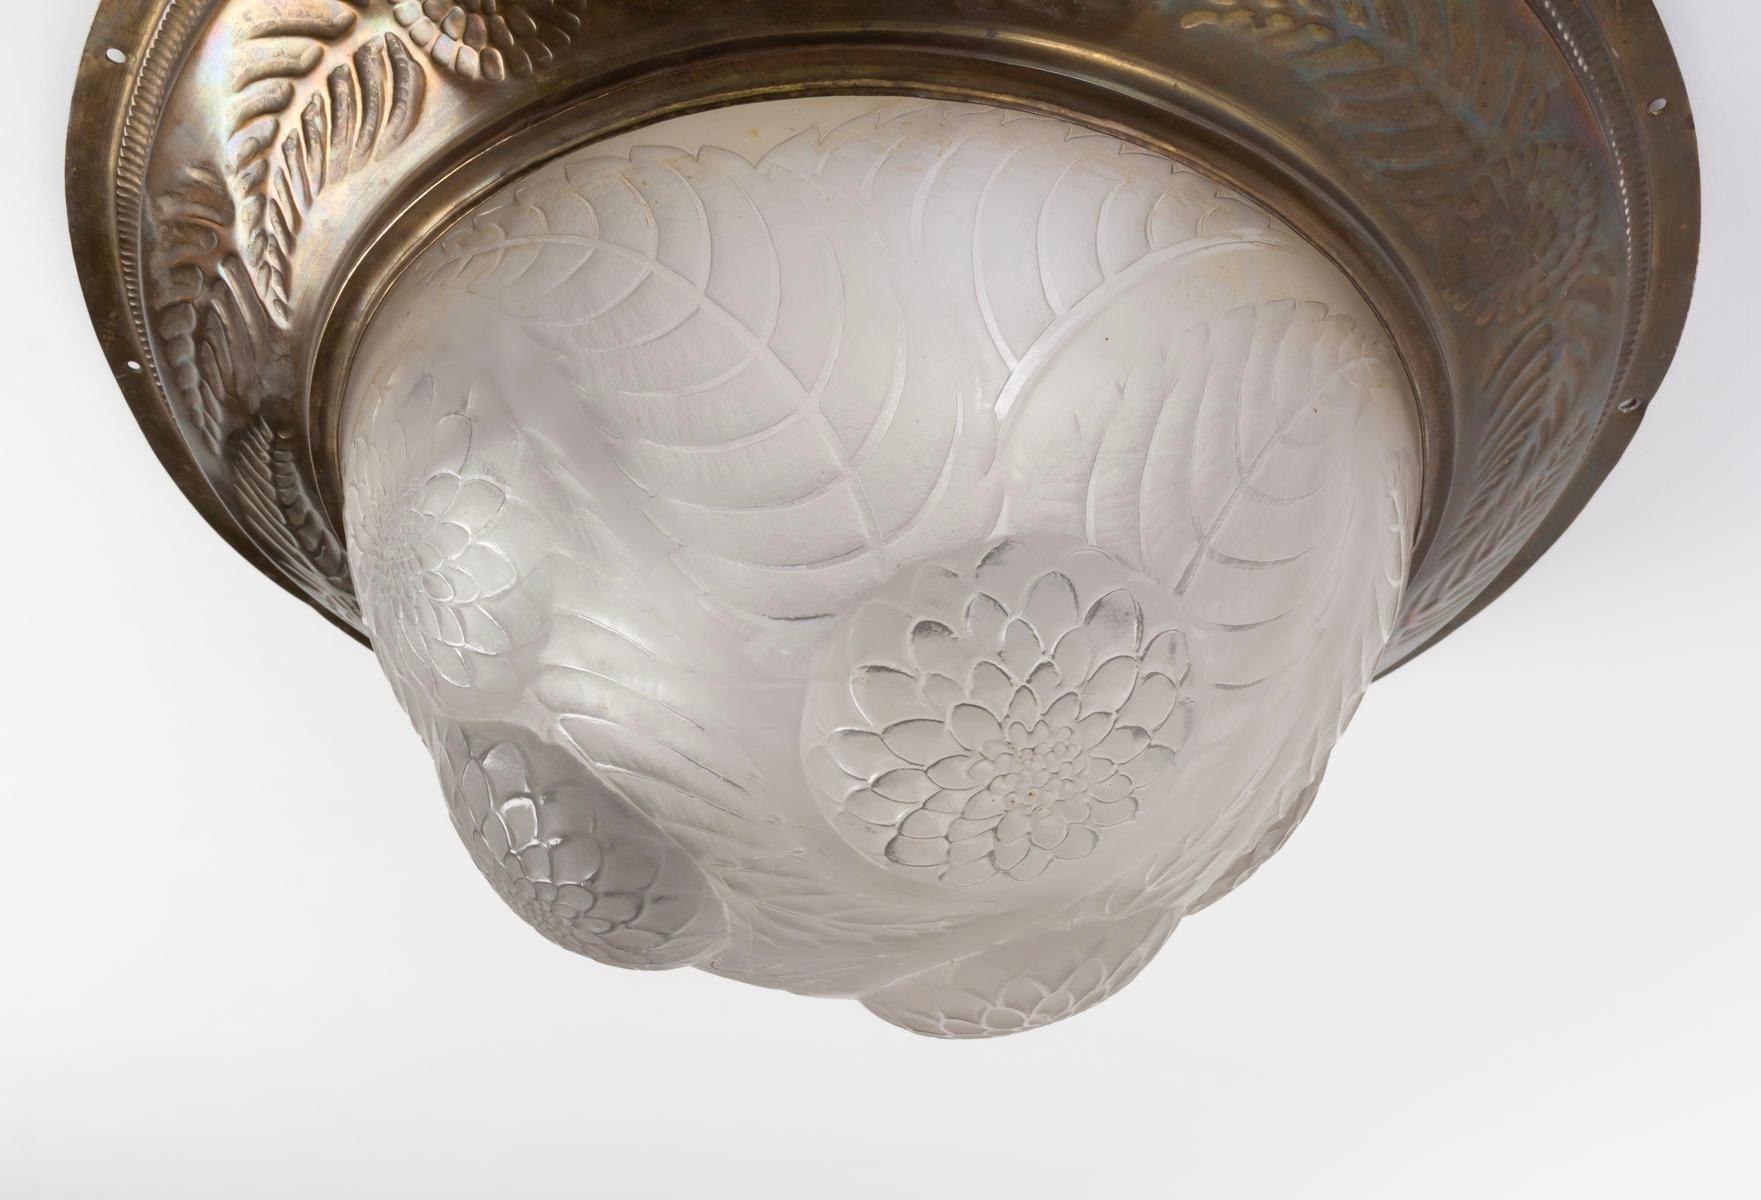 Molded 1921 Rene Lalique Dahlias Ceiling Light Fixture Shade Frosted Glass 